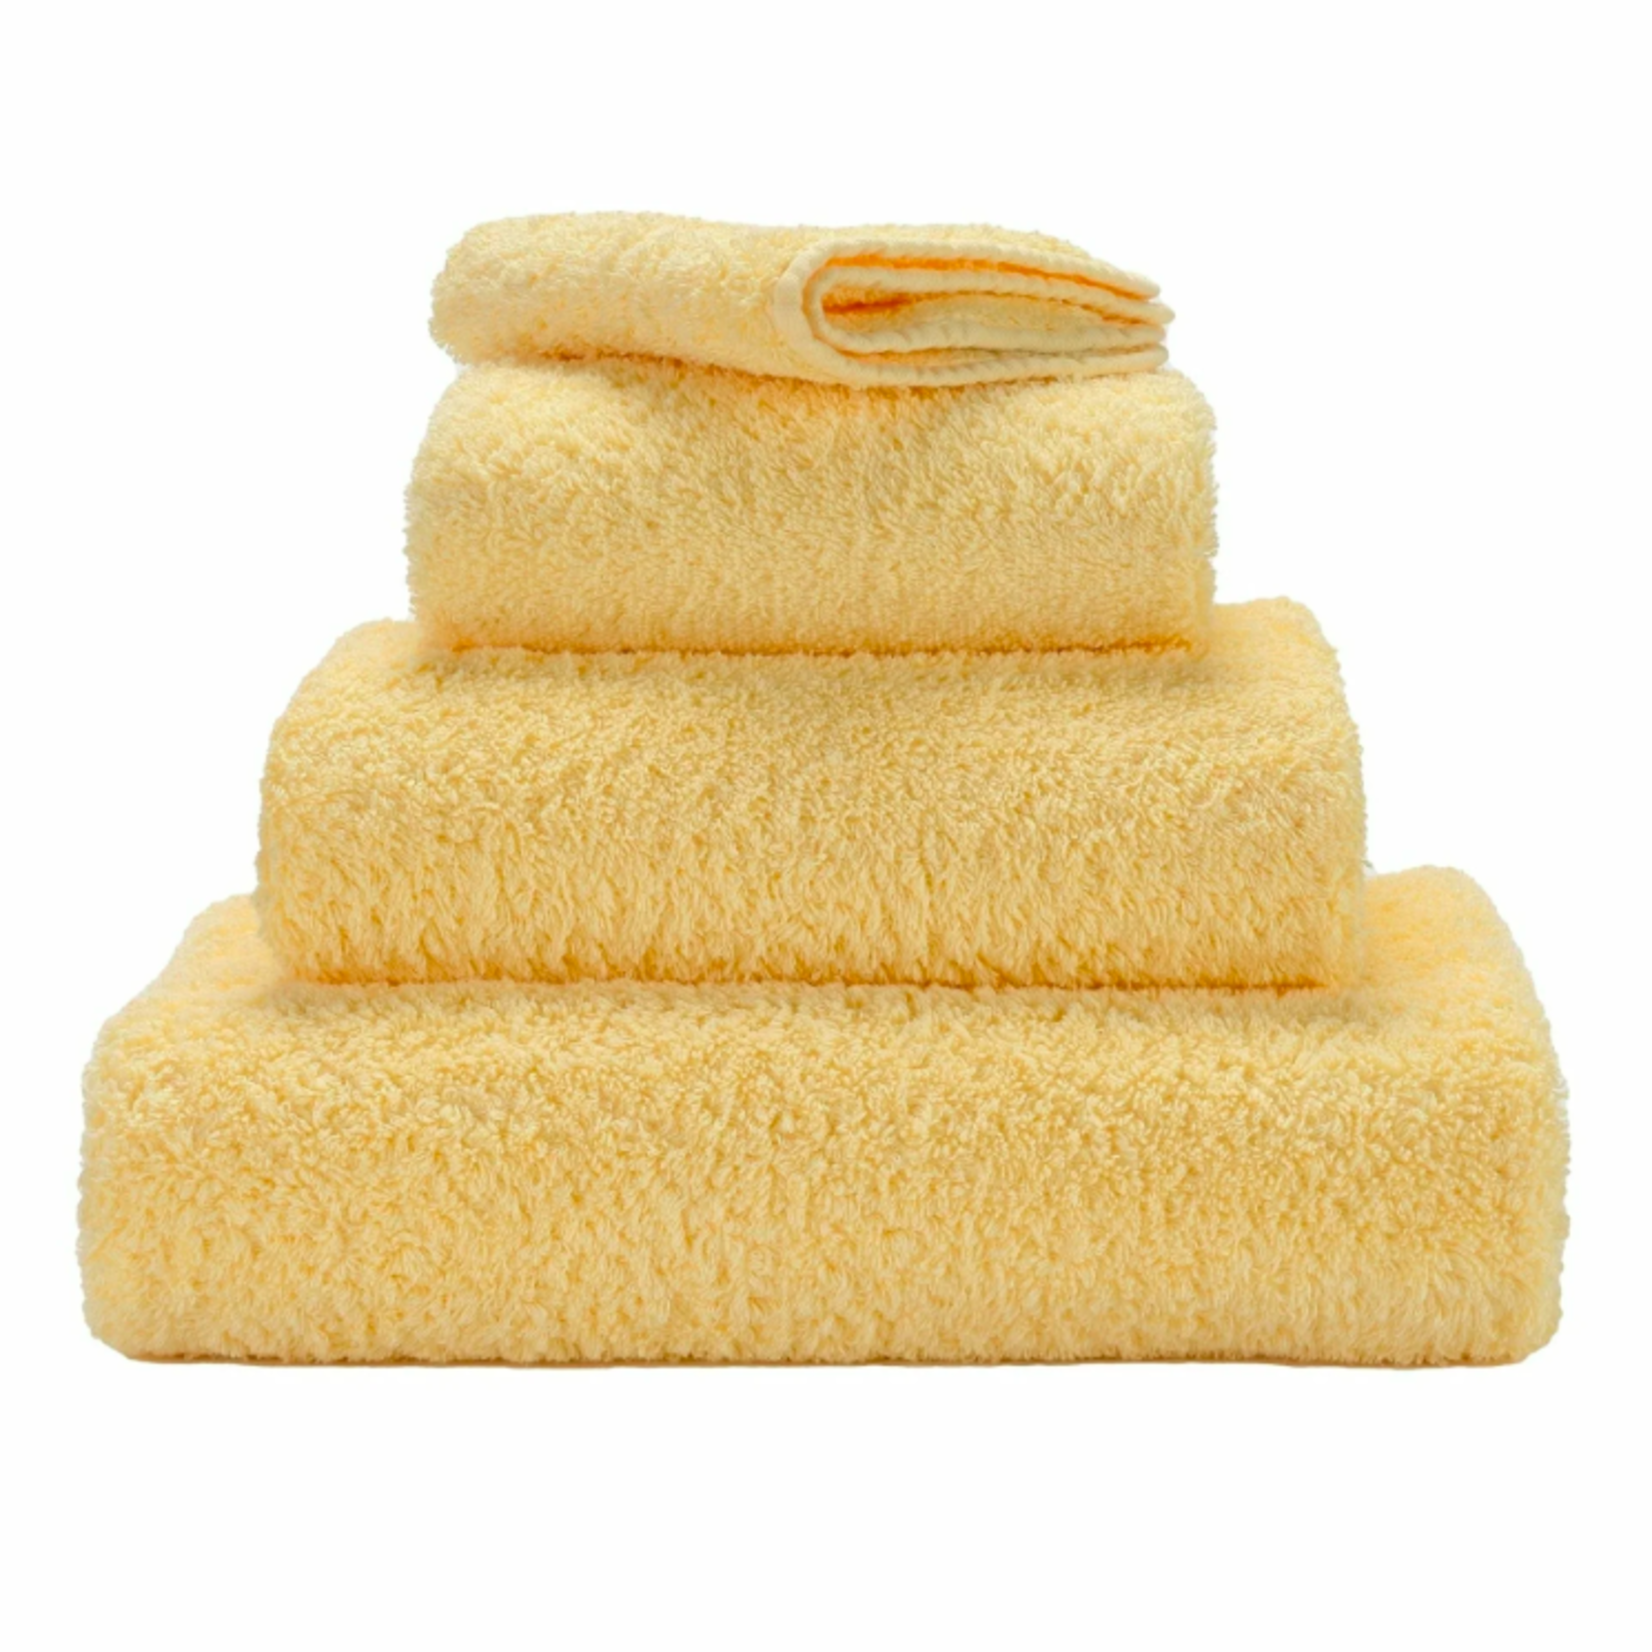 Abyss Abyss Super Pile Towels 803 Popcorn